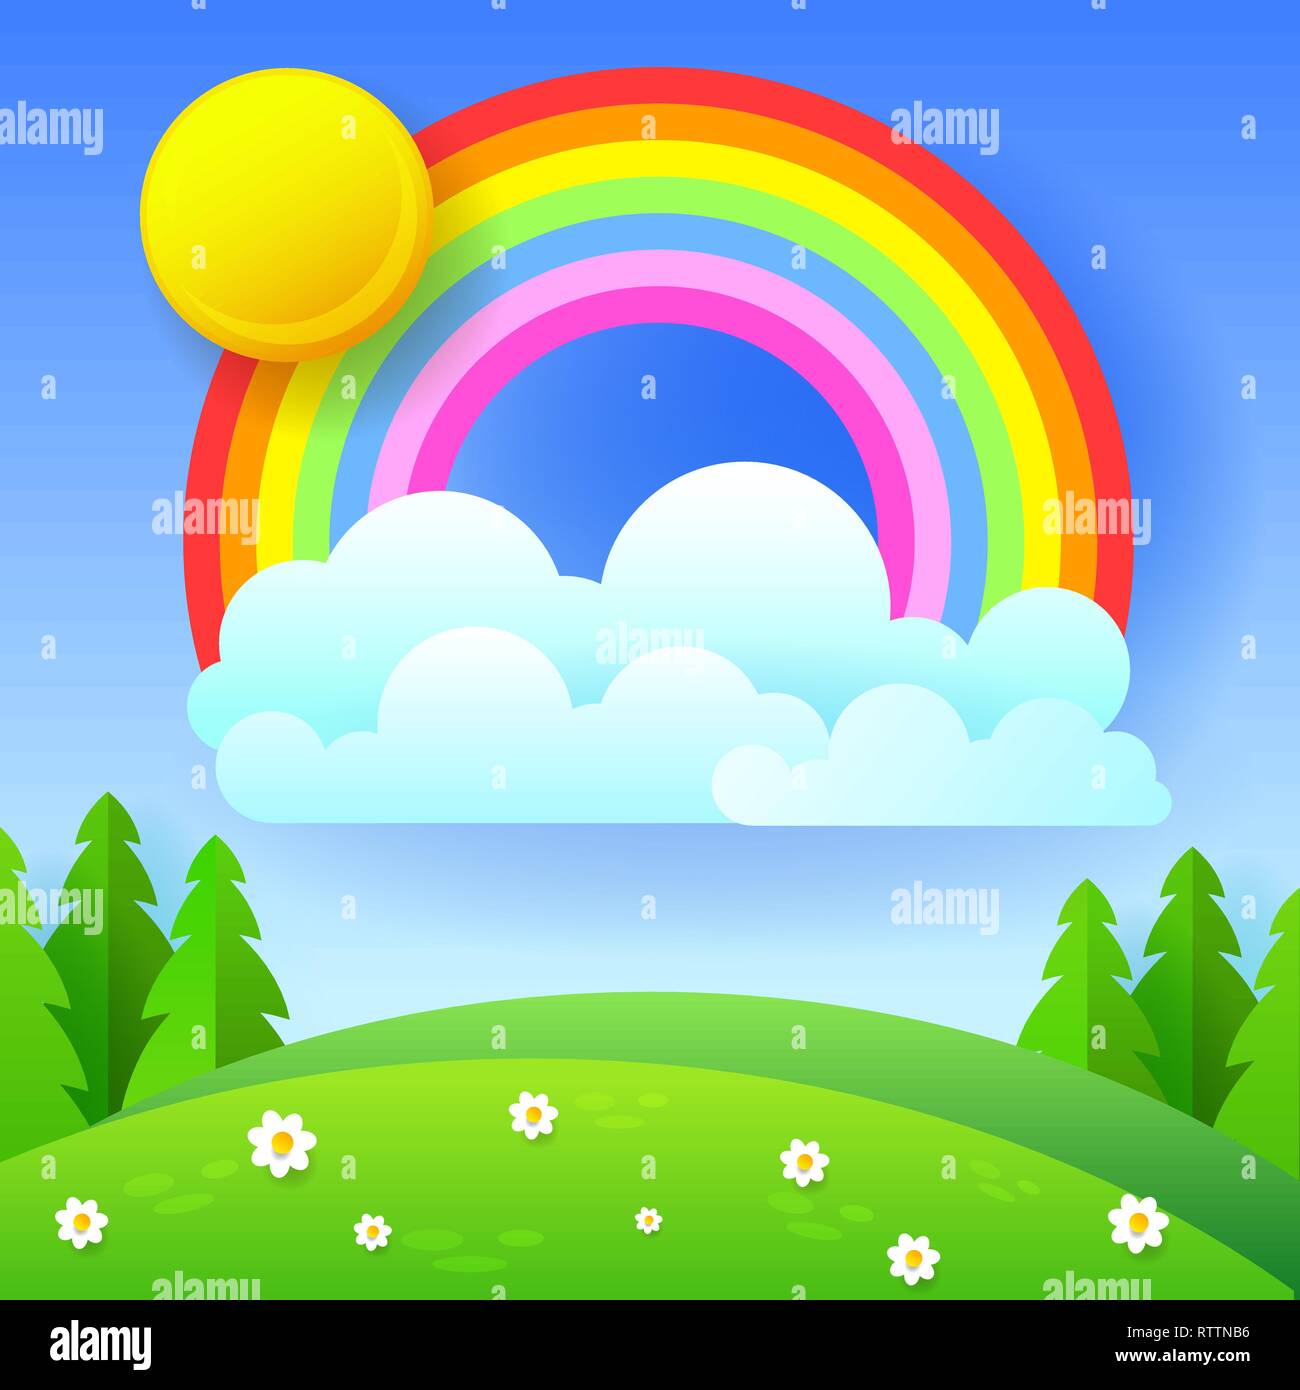 Beautiful Seasonal Background With Bright Rainbow, Flowers In Grass ...